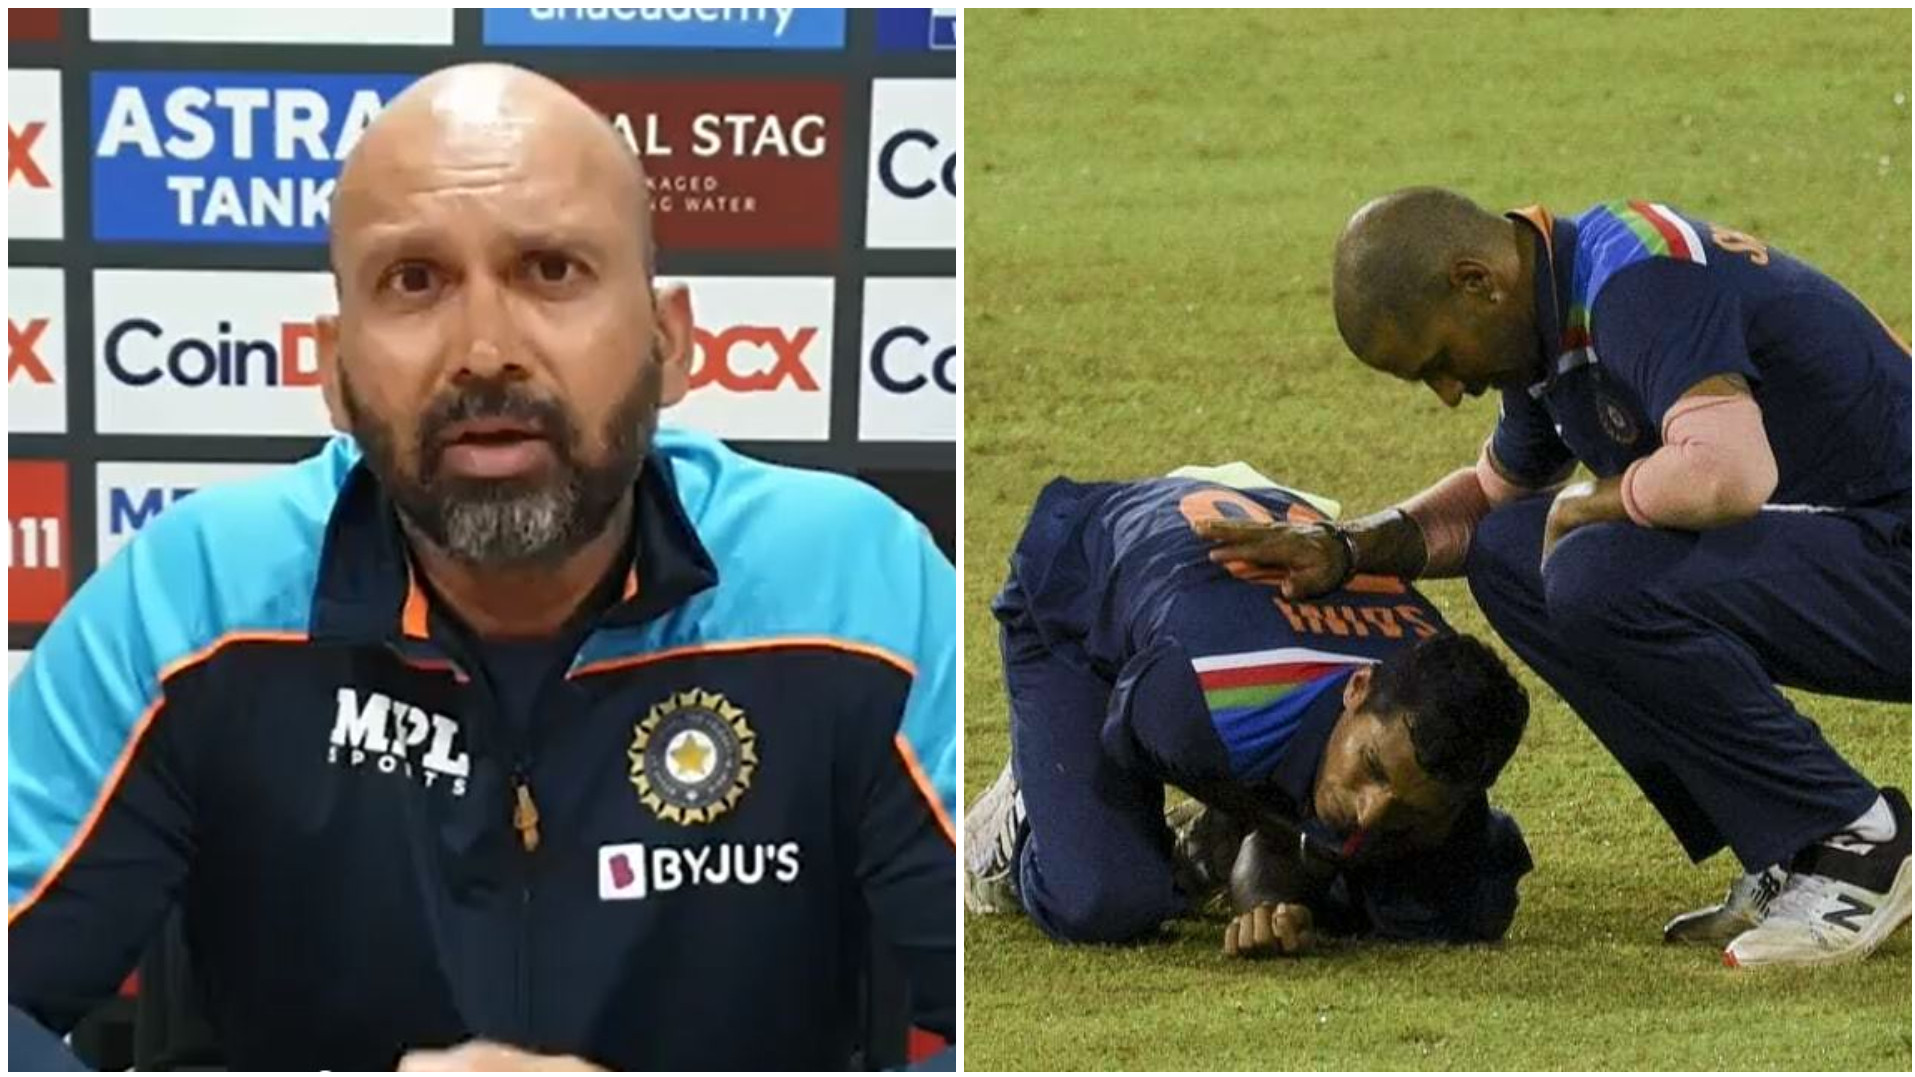 SL v IND 2021: India's bowling coach Paras Mhambrey shares update on Navdeep Saini's Injury